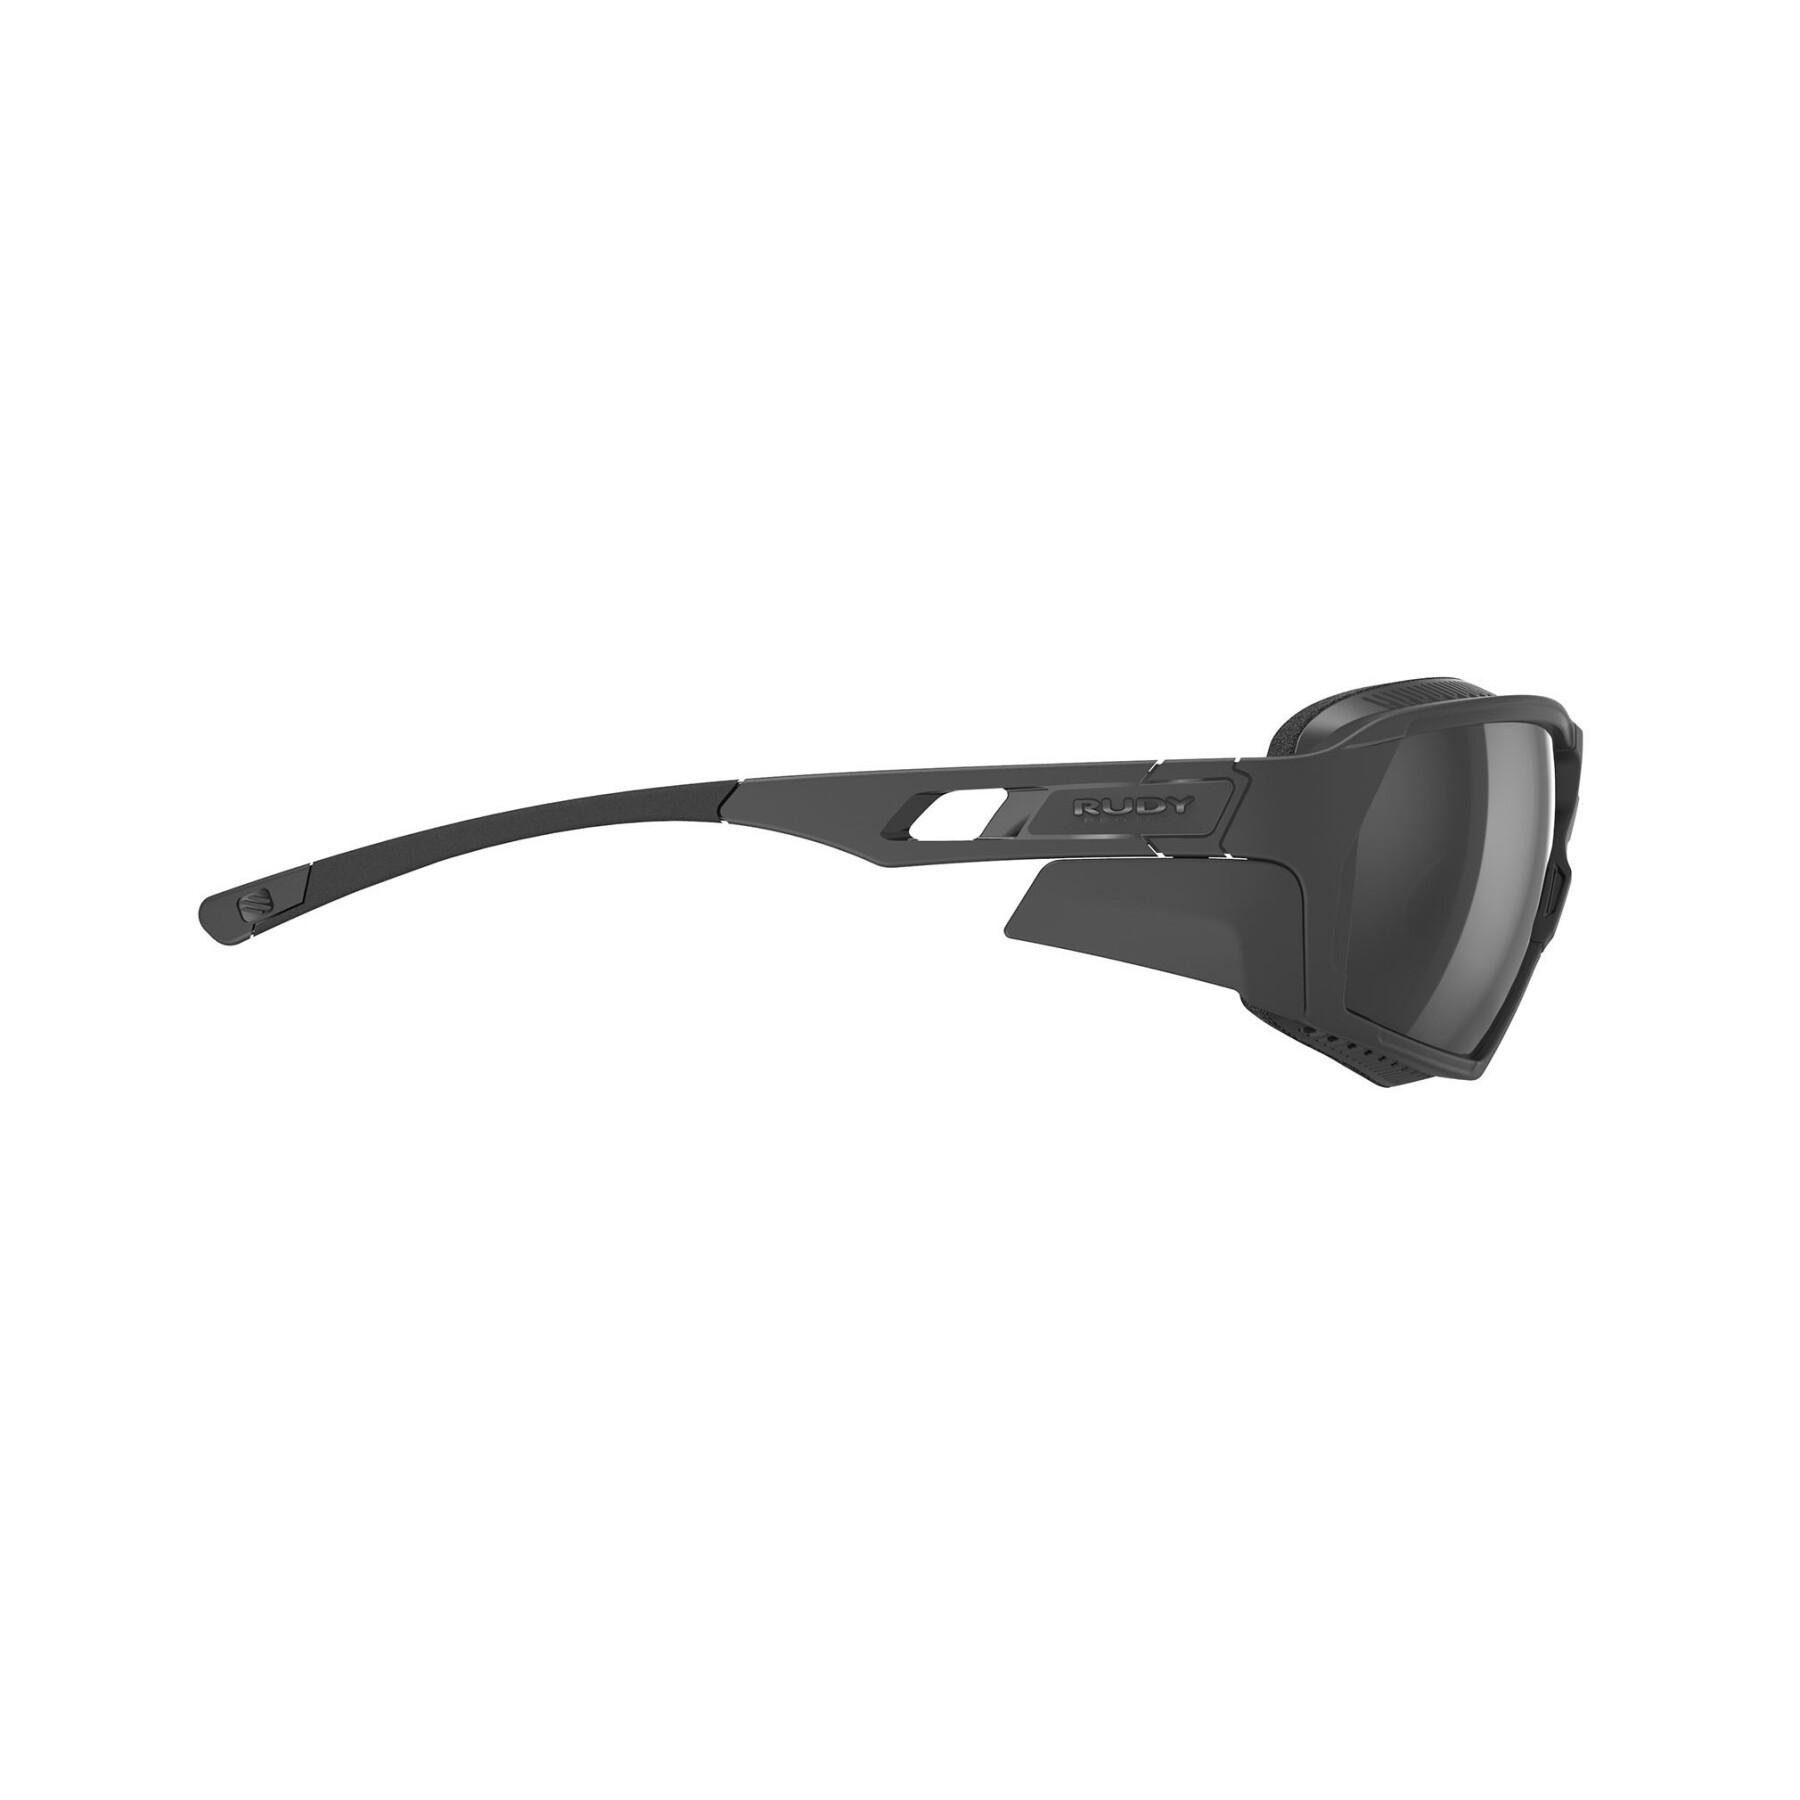 Performance eyewear Rudy Project Agent Q Stealth